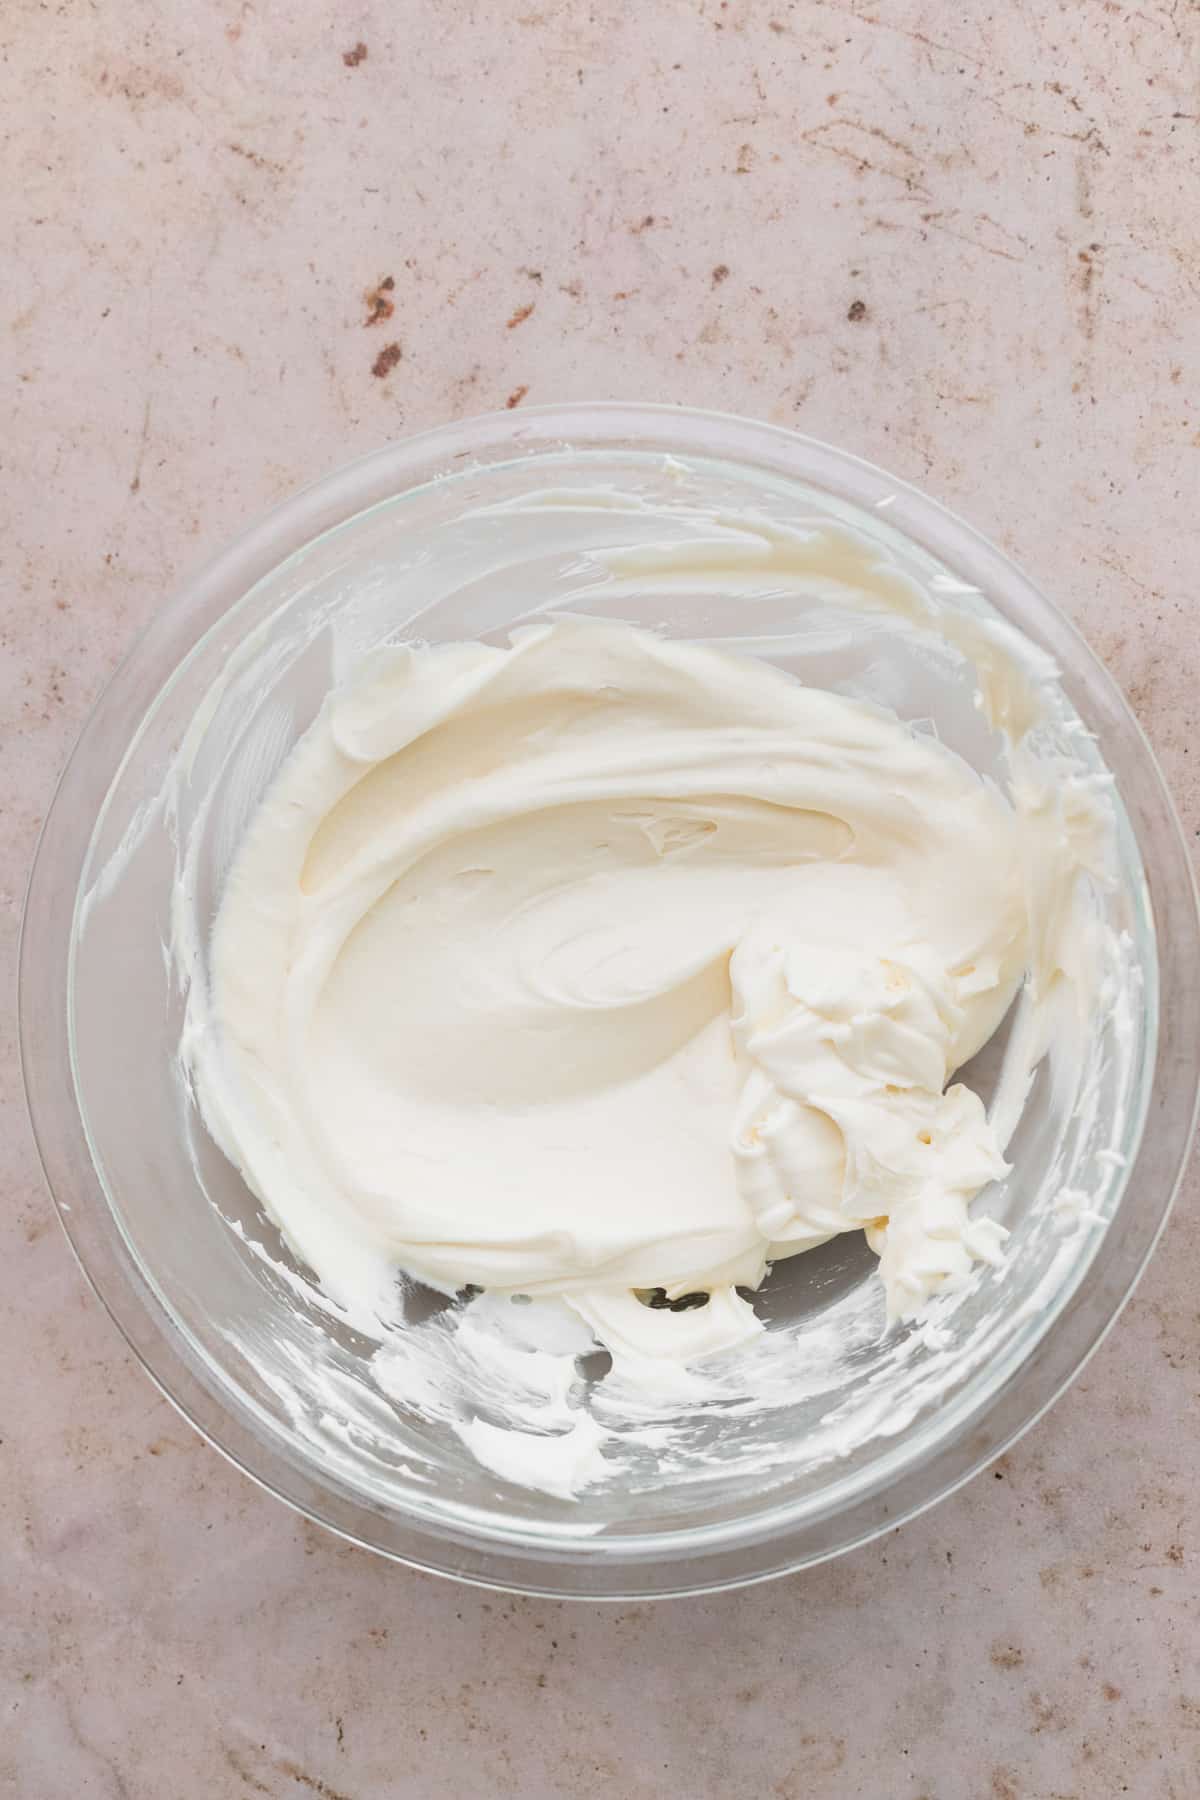 Whipped cream cheese in a glass bowl.